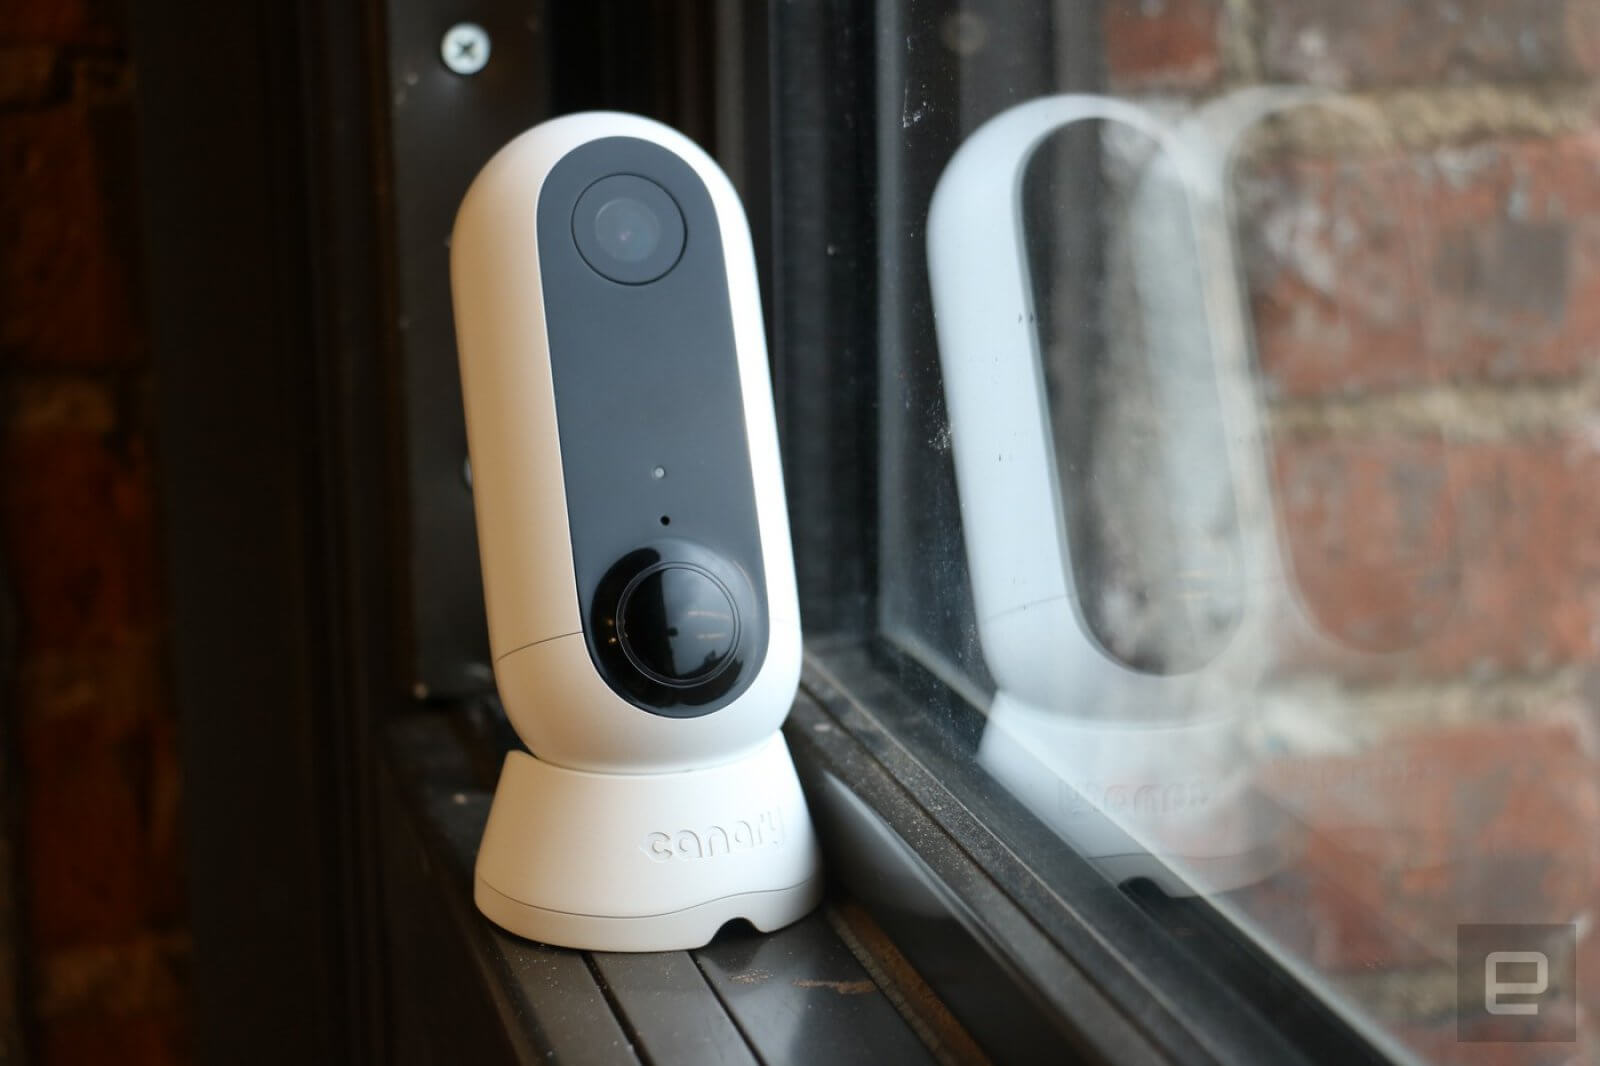 Canary Flex is a small, weatherproof security camera